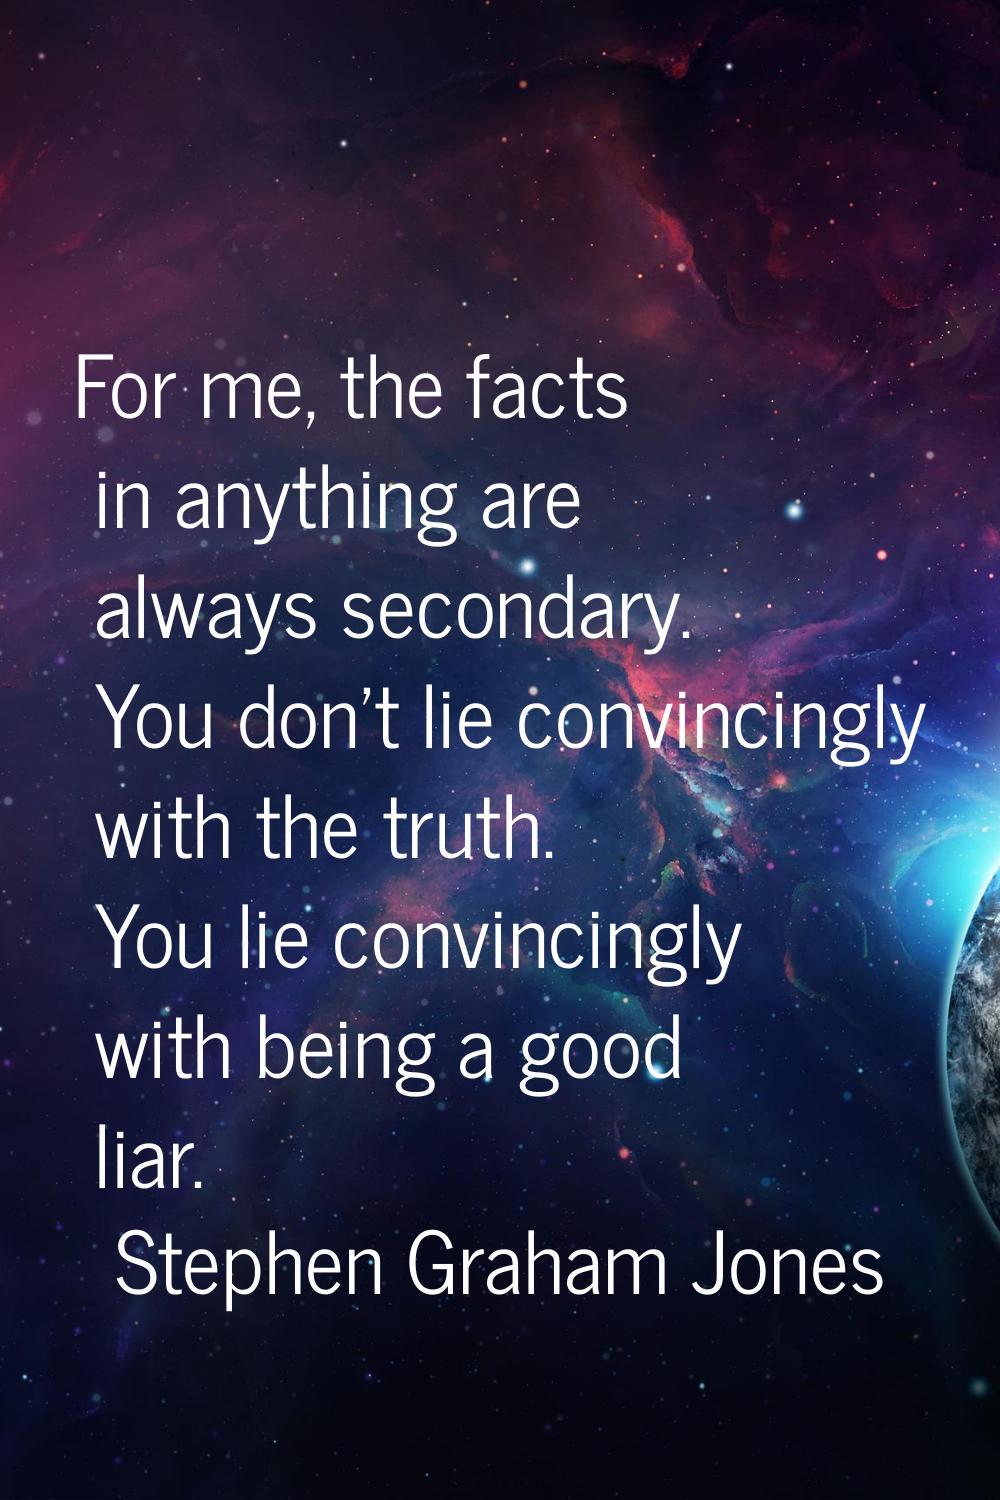 For me, the facts in anything are always secondary. You don't lie convincingly with the truth. You 